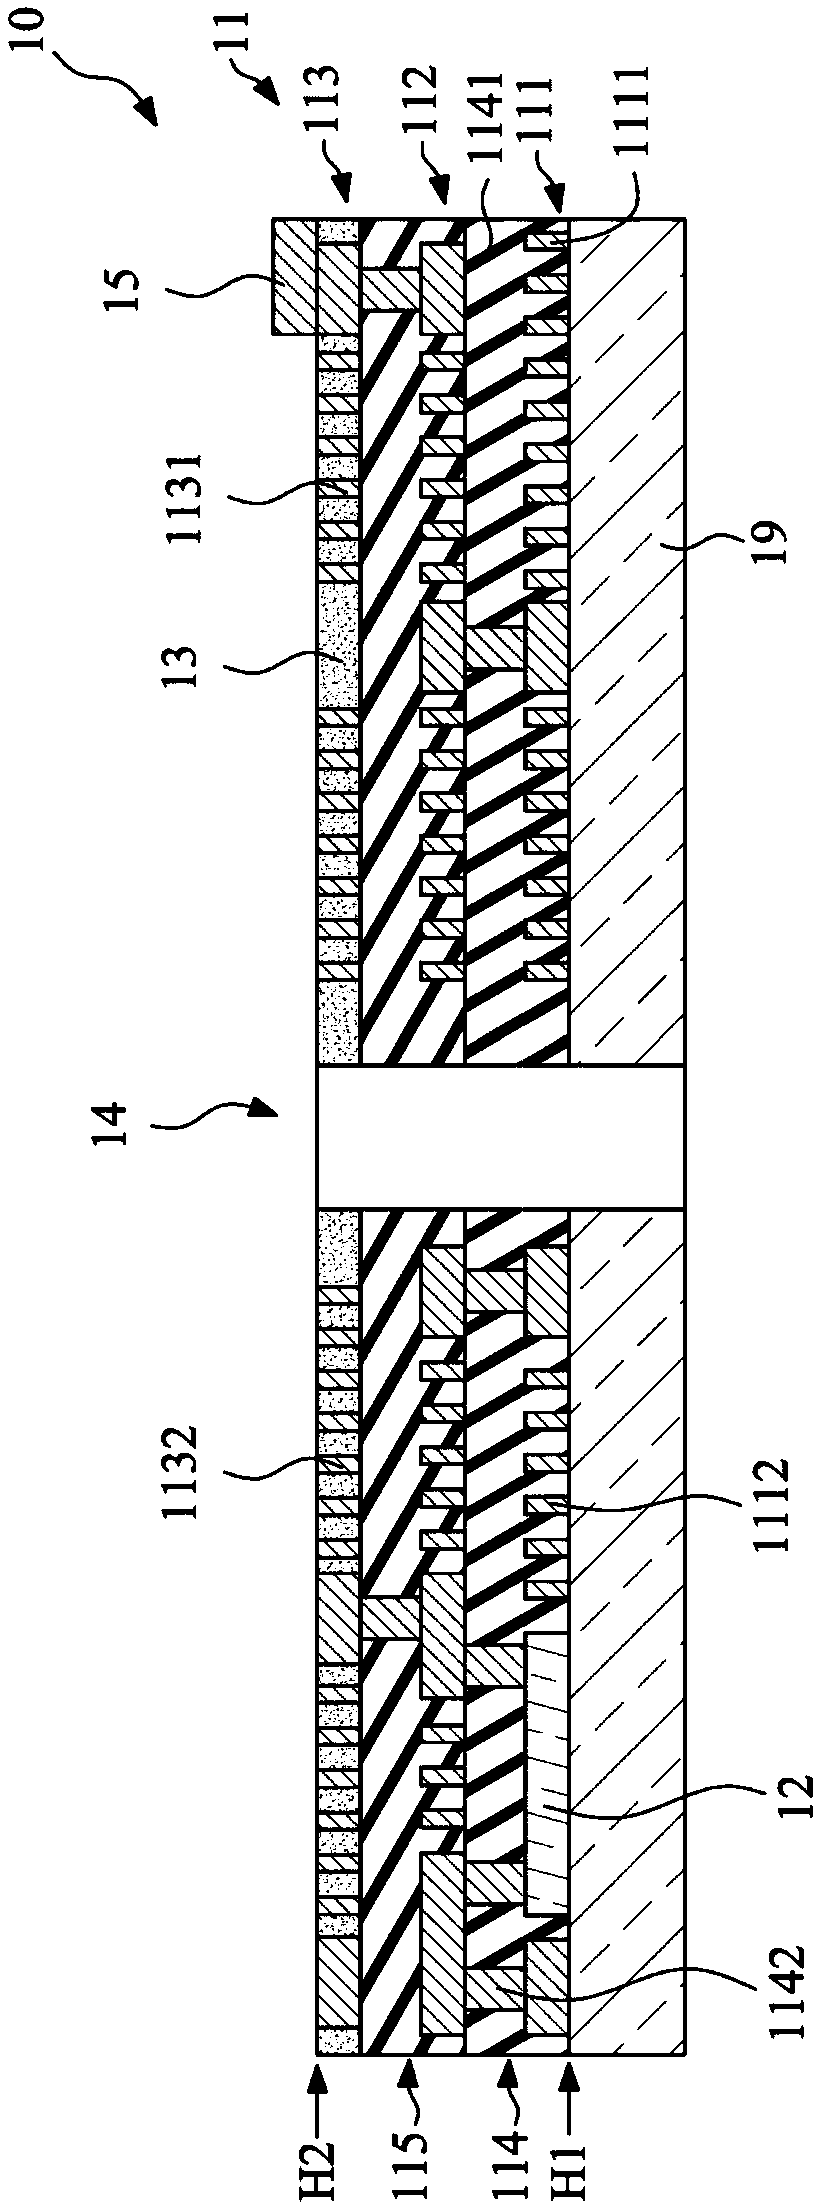 Semiconductor packaging structure used for driving motor and motor